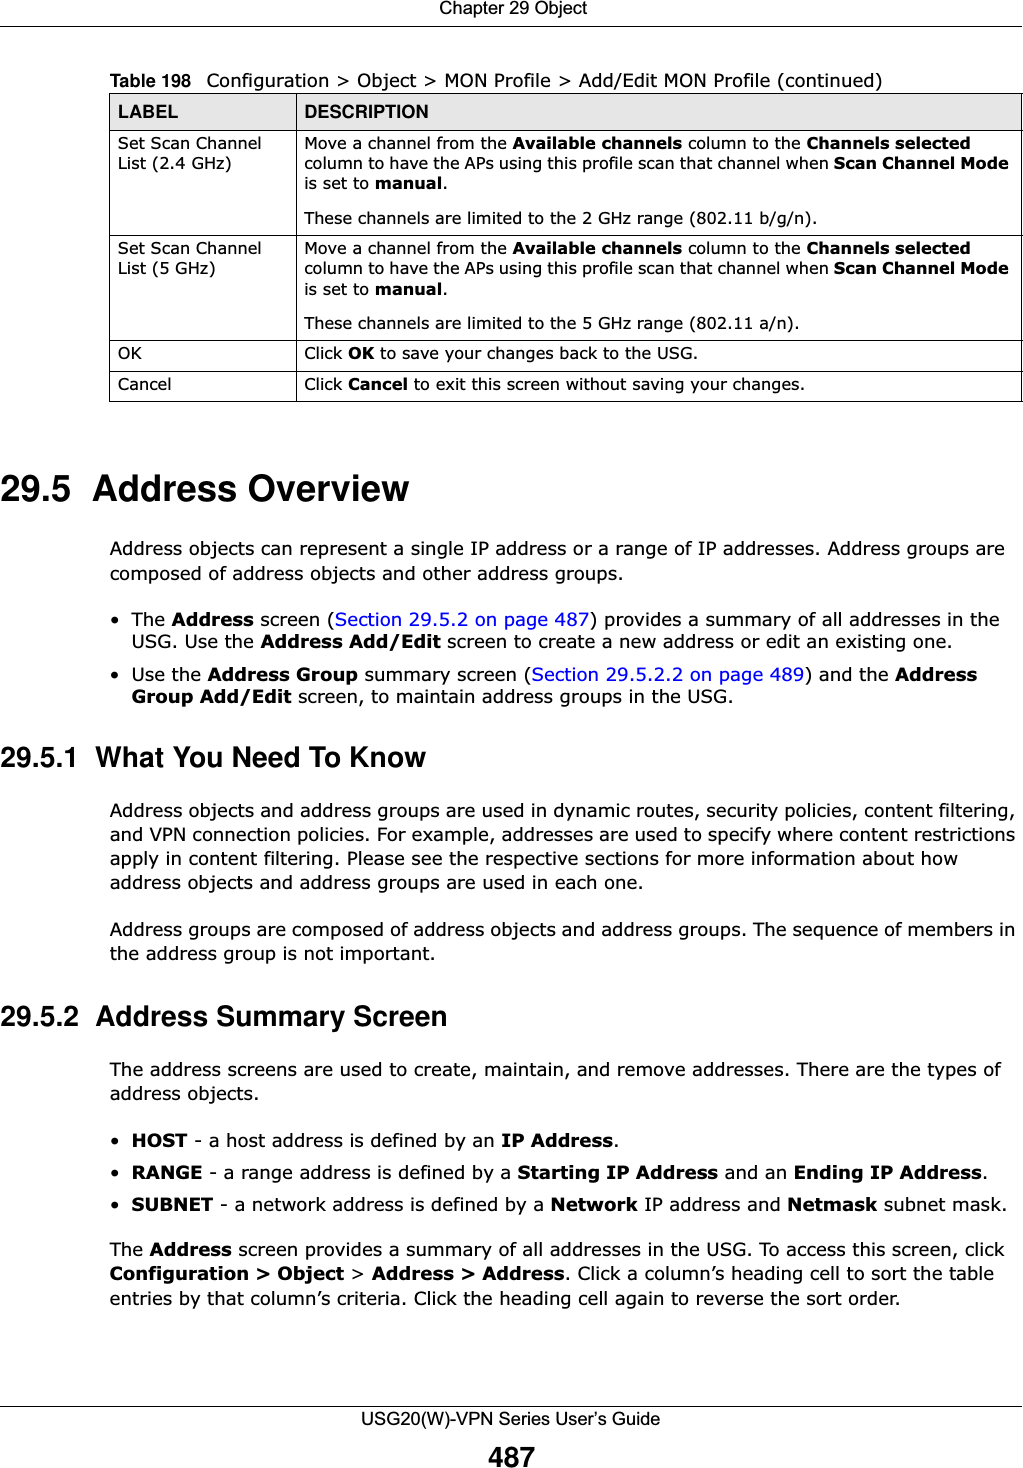  Chapter 29 ObjectUSG20(W)-VPN Series User’s Guide48729.5  Address OverviewAddress objects can represent a single IP address or a range of IP addresses. Address groups are composed of address objects and other address groups. •The Address screen (Section 29.5.2 on page 487) provides a summary of all addresses in the USG. Use the Address Add/Edit screen to create a new address or edit an existing one.•Use the Address Group summary screen (Section 29.5.2.2 on page 489) and the Address Group Add/Edit screen, to maintain address groups in the USG.29.5.1  What You Need To KnowAddress objects and address groups are used in dynamic routes, security policies, content filtering, and VPN connection policies. For example, addresses are used to specify where content restrictions apply in content filtering. Please see the respective sections for more information about how address objects and address groups are used in each one.Address groups are composed of address objects and address groups. The sequence of members in the address group is not important.29.5.2  Address Summary ScreenThe address screens are used to create, maintain, and remove addresses. There are the types of address objects.•HOST - a host address is defined by an IP Address.•RANGE - a range address is defined by a Starting IP Address and an Ending IP Address.•SUBNET - a network address is defined by a Network IP address and Netmask subnet mask.The Address screen provides a summary of all addresses in the USG. To access this screen, click Configuration &gt; Object &gt; Address &gt; Address. Click a column’s heading cell to sort the table entries by that column’s criteria. Click the heading cell again to reverse the sort order.Set Scan Channel List (2.4 GHz)Move a channel from the Available channels column to the Channels selected column to have the APs using this profile scan that channel when Scan Channel Mode is set to manual.These channels are limited to the 2 GHz range (802.11 b/g/n).Set Scan Channel List (5 GHz)Move a channel from the Available channels column to the Channels selected column to have the APs using this profile scan that channel when Scan Channel Mode is set to manual.These channels are limited to the 5 GHz range (802.11 a/n).OK Click OK to save your changes back to the USG.Cancel Click Cancel to exit this screen without saving your changes.Table 198   Configuration &gt; Object &gt; MON Profile &gt; Add/Edit MON Profile (continued)LABEL DESCRIPTION